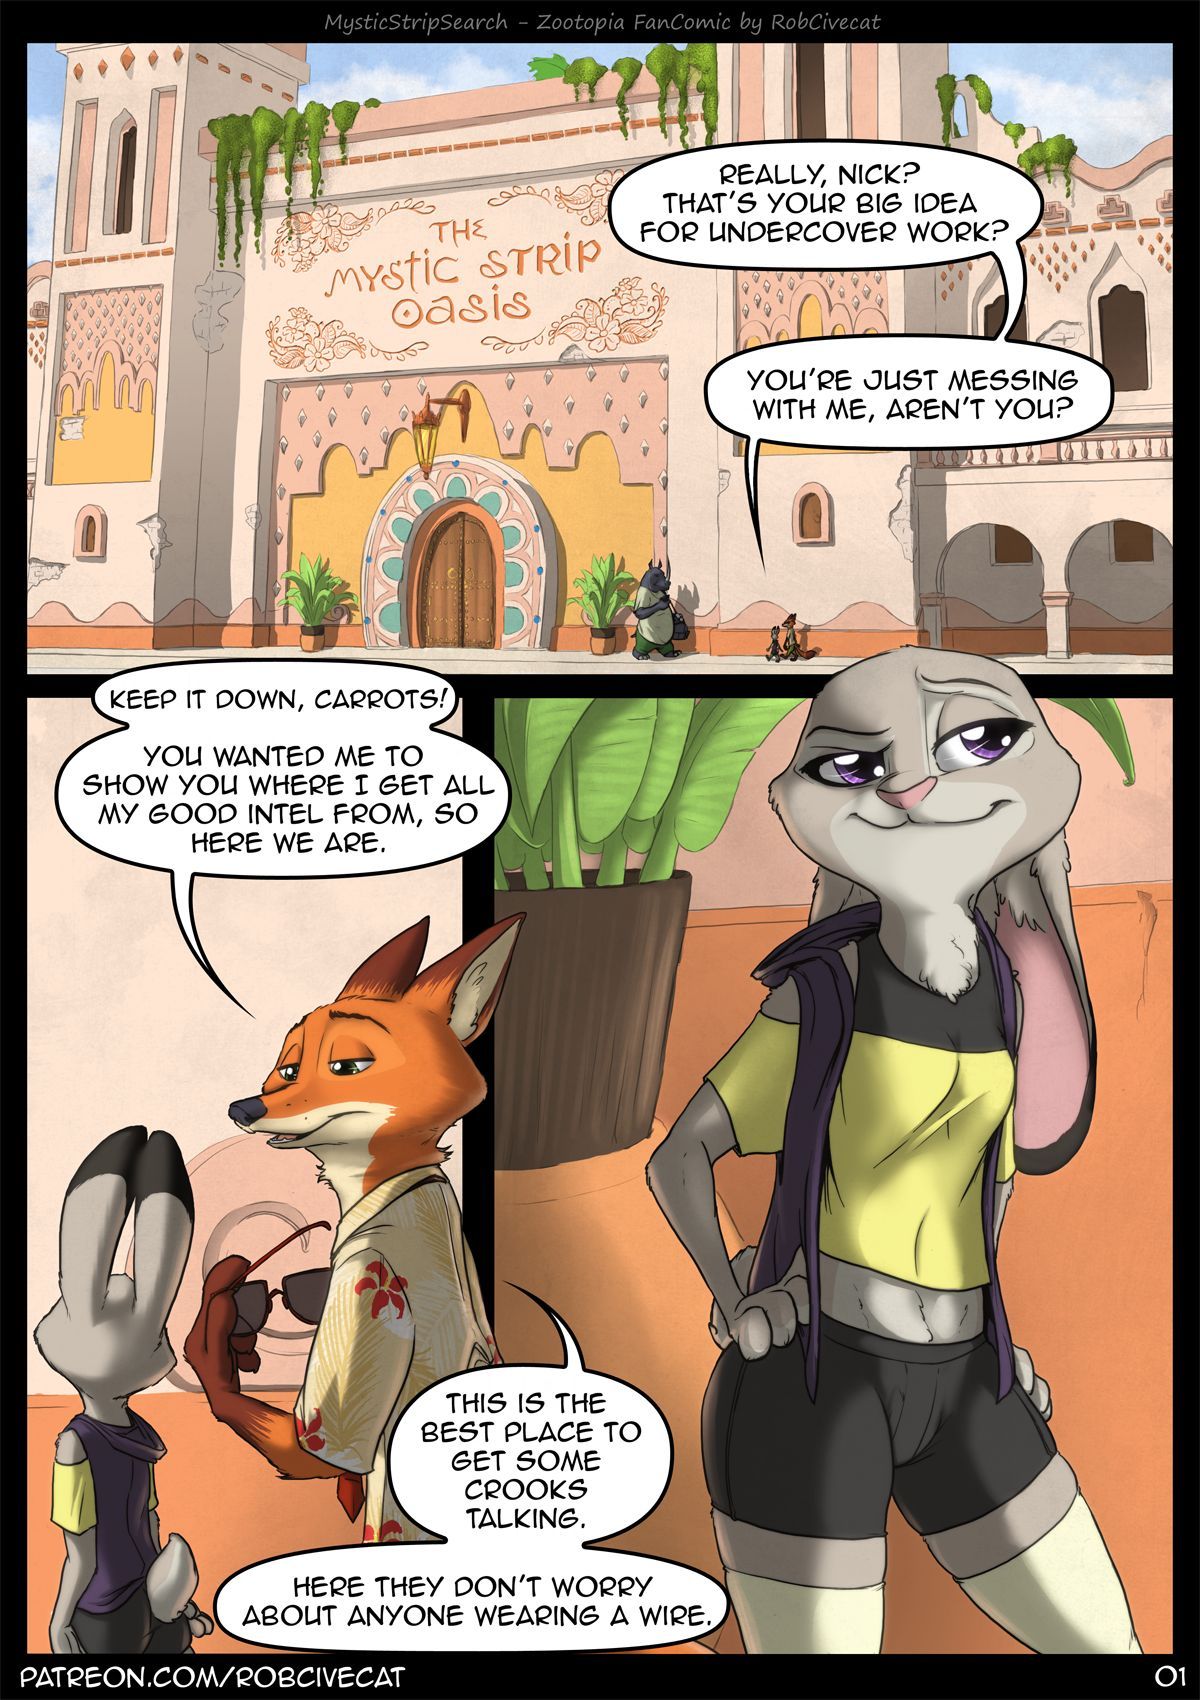 [RobCivecat] Mystic Strip Search (Zootopia) [Ongoing] 2